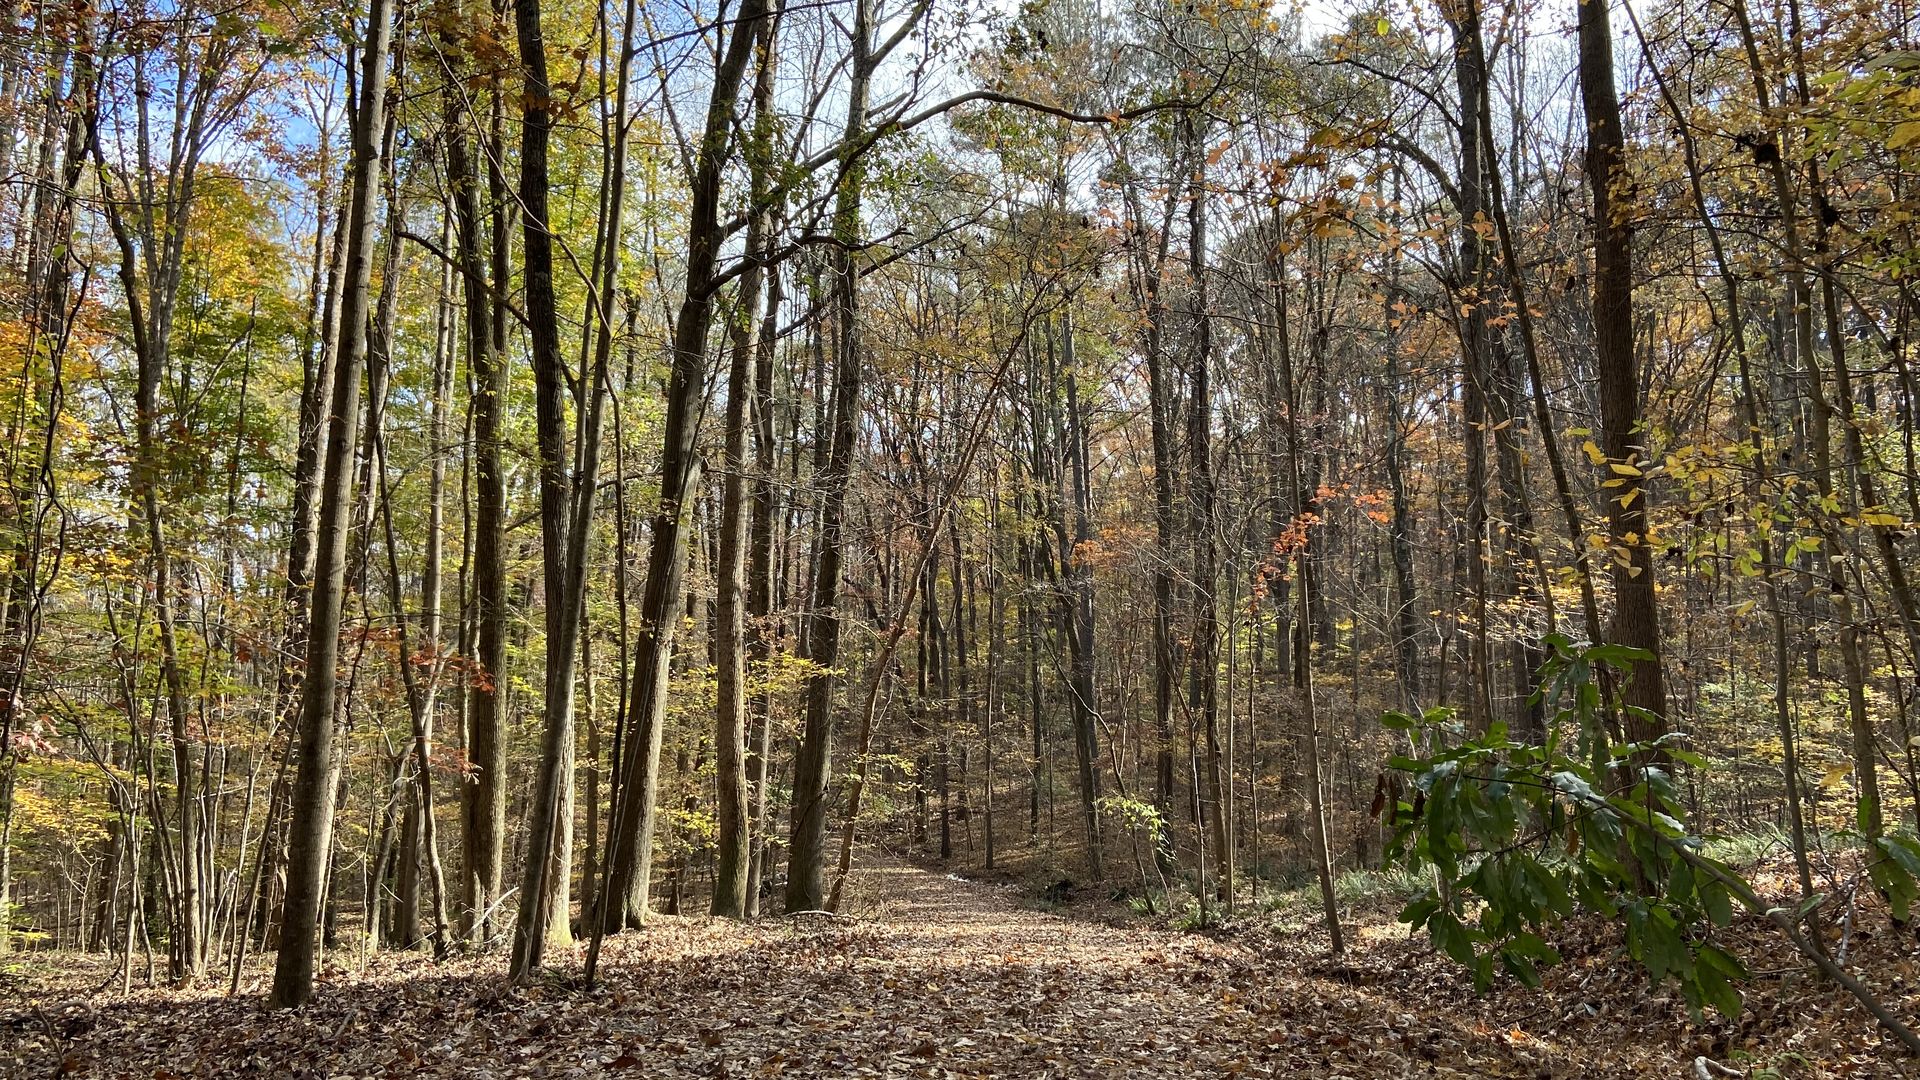 A photo of wide forest trail surrounded by tall trees in the autumn